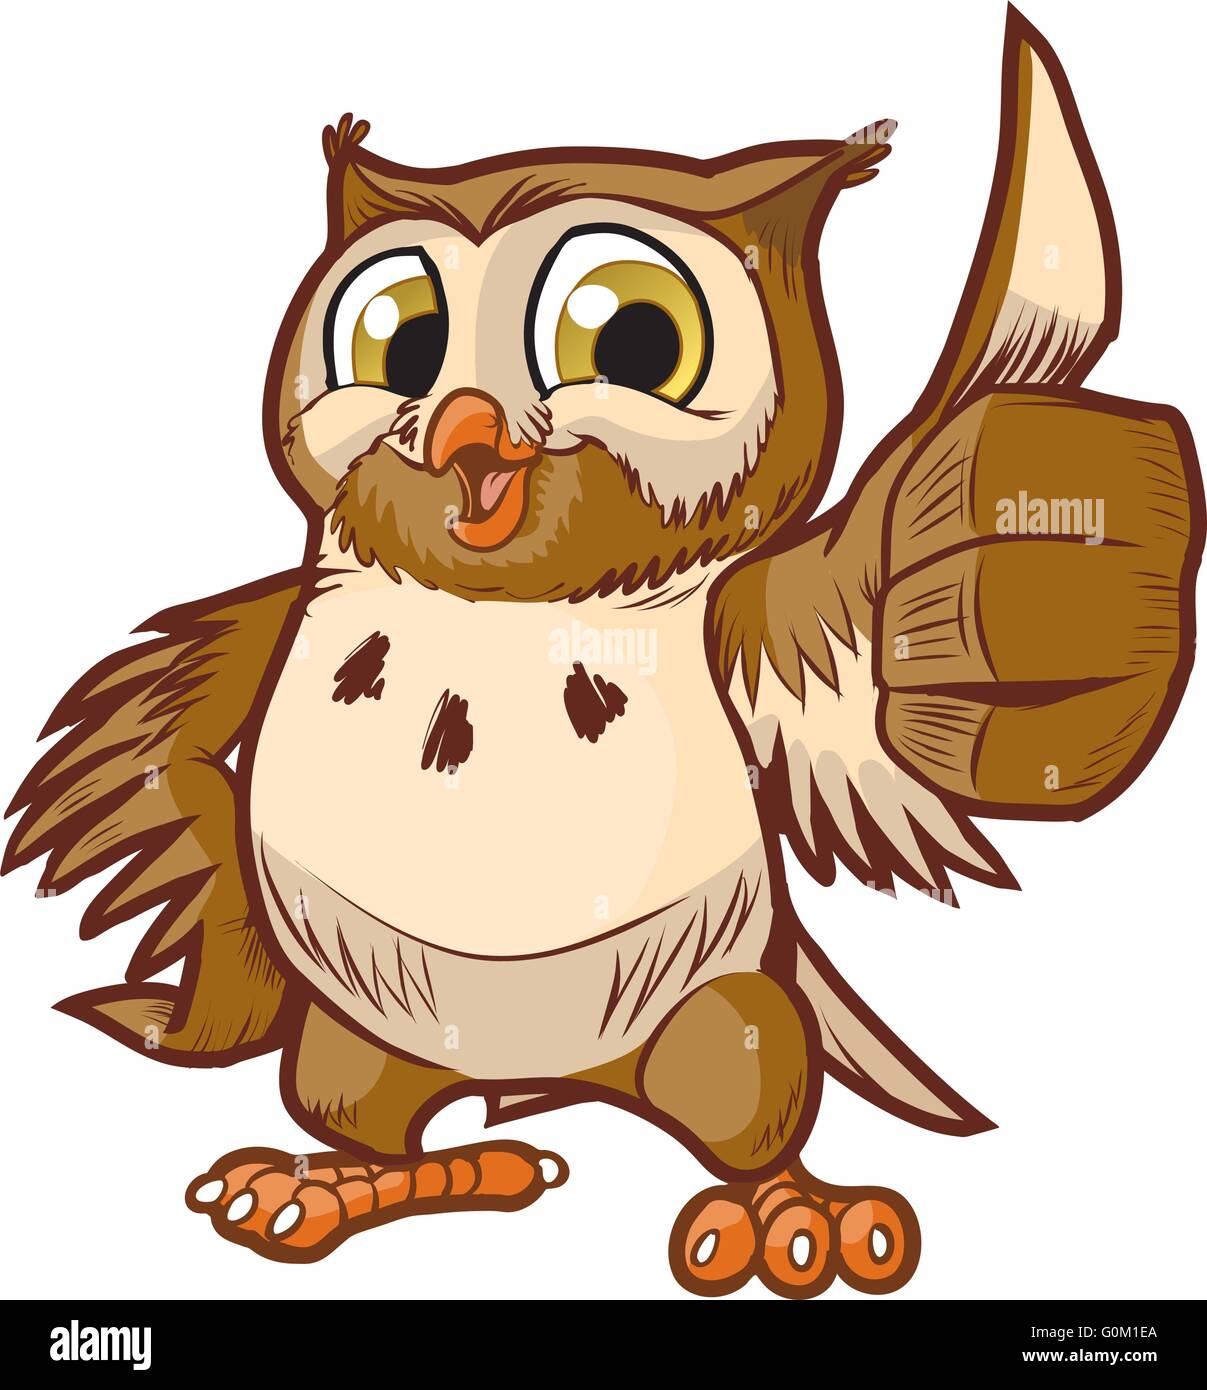 Vector cartoon clip art illustration of a cute and happy owl mascot giving the thumbs up hand gesture. Stock Vector